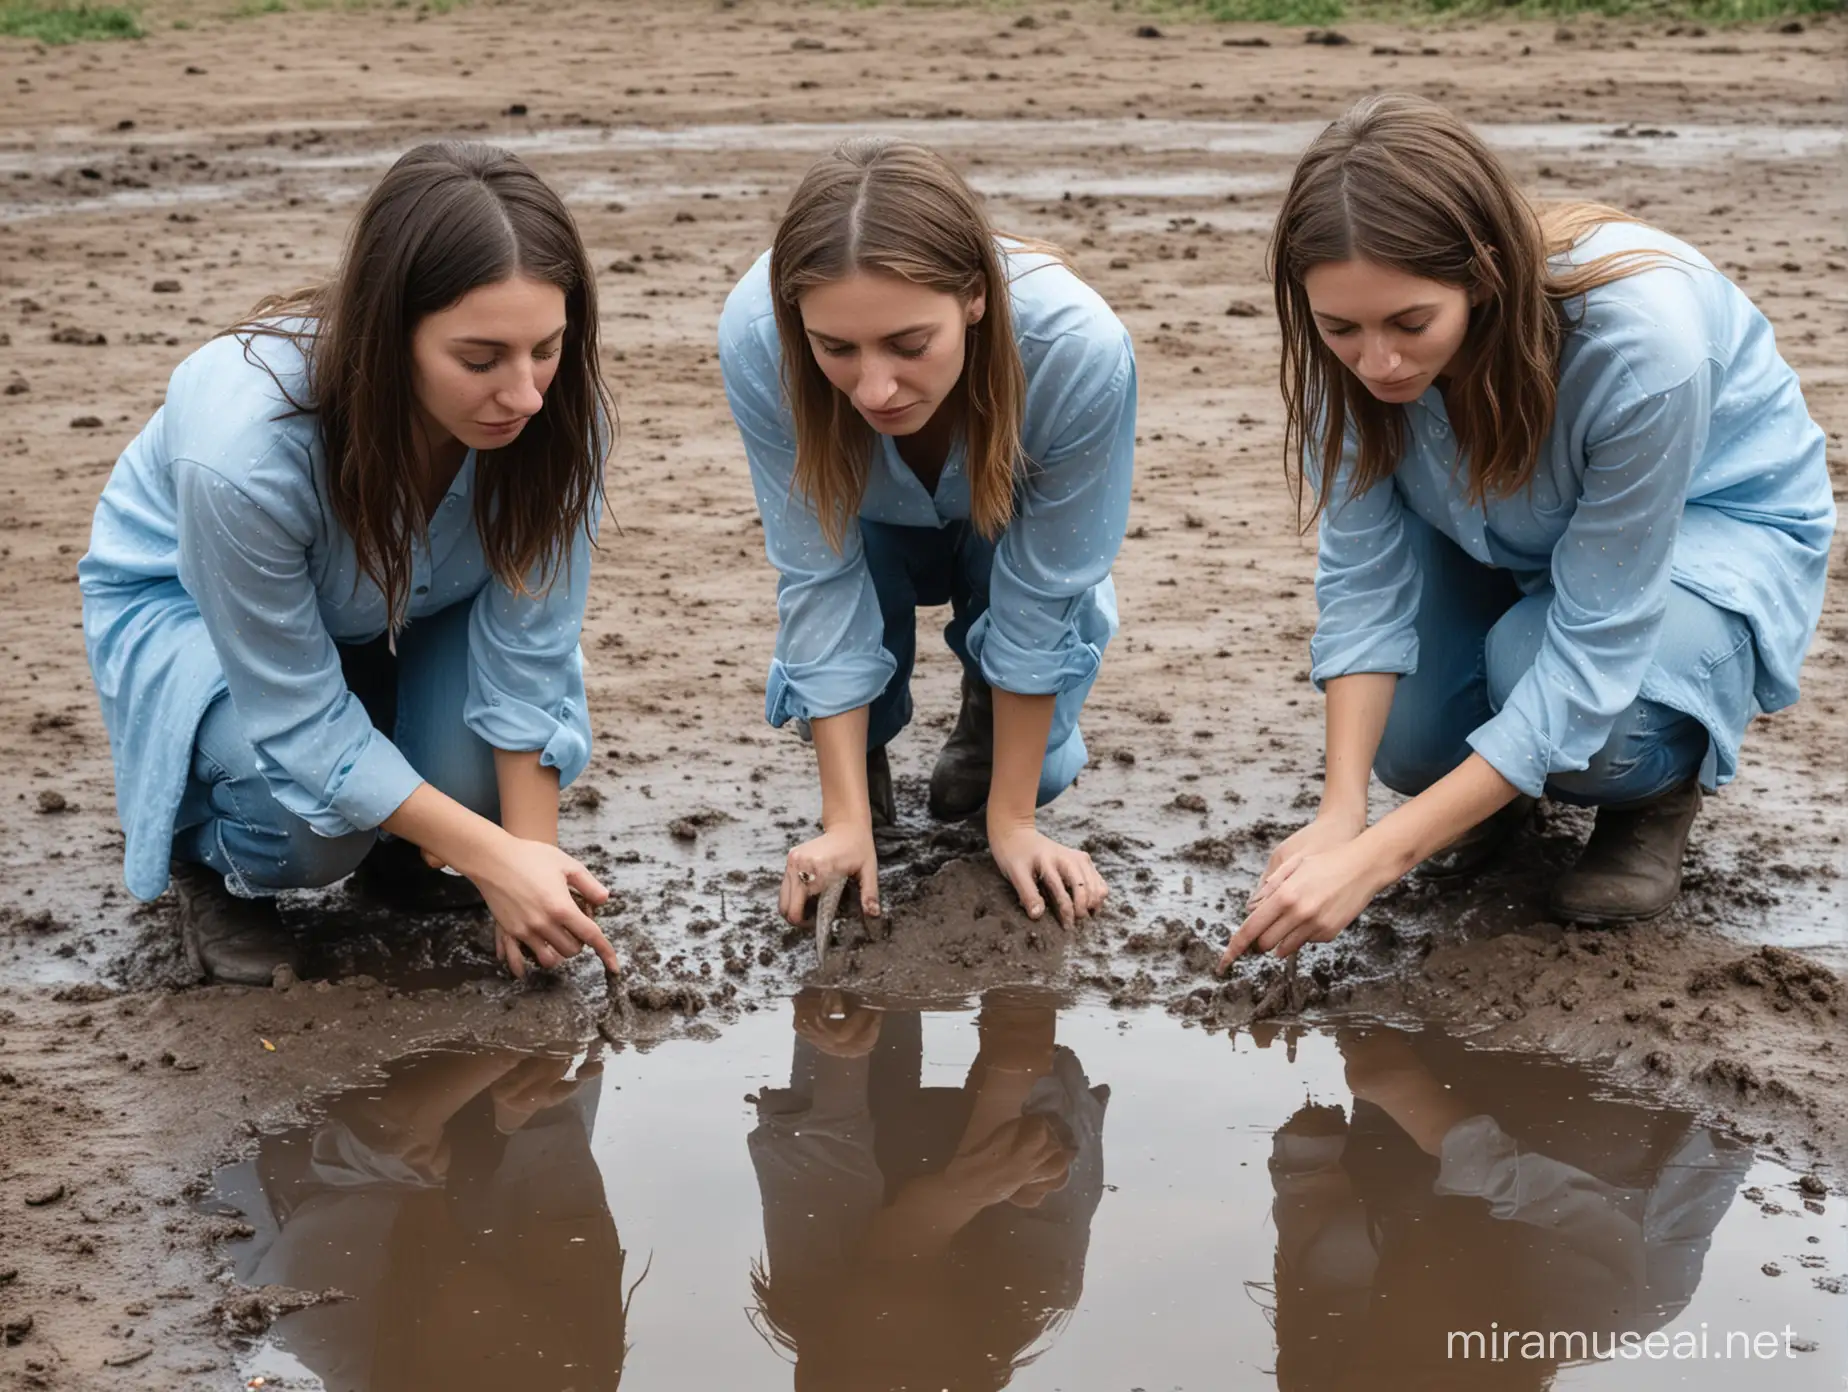 Realistic Portrait of Two Women with Big Noses Contemplating in Mud Puddle Reflection